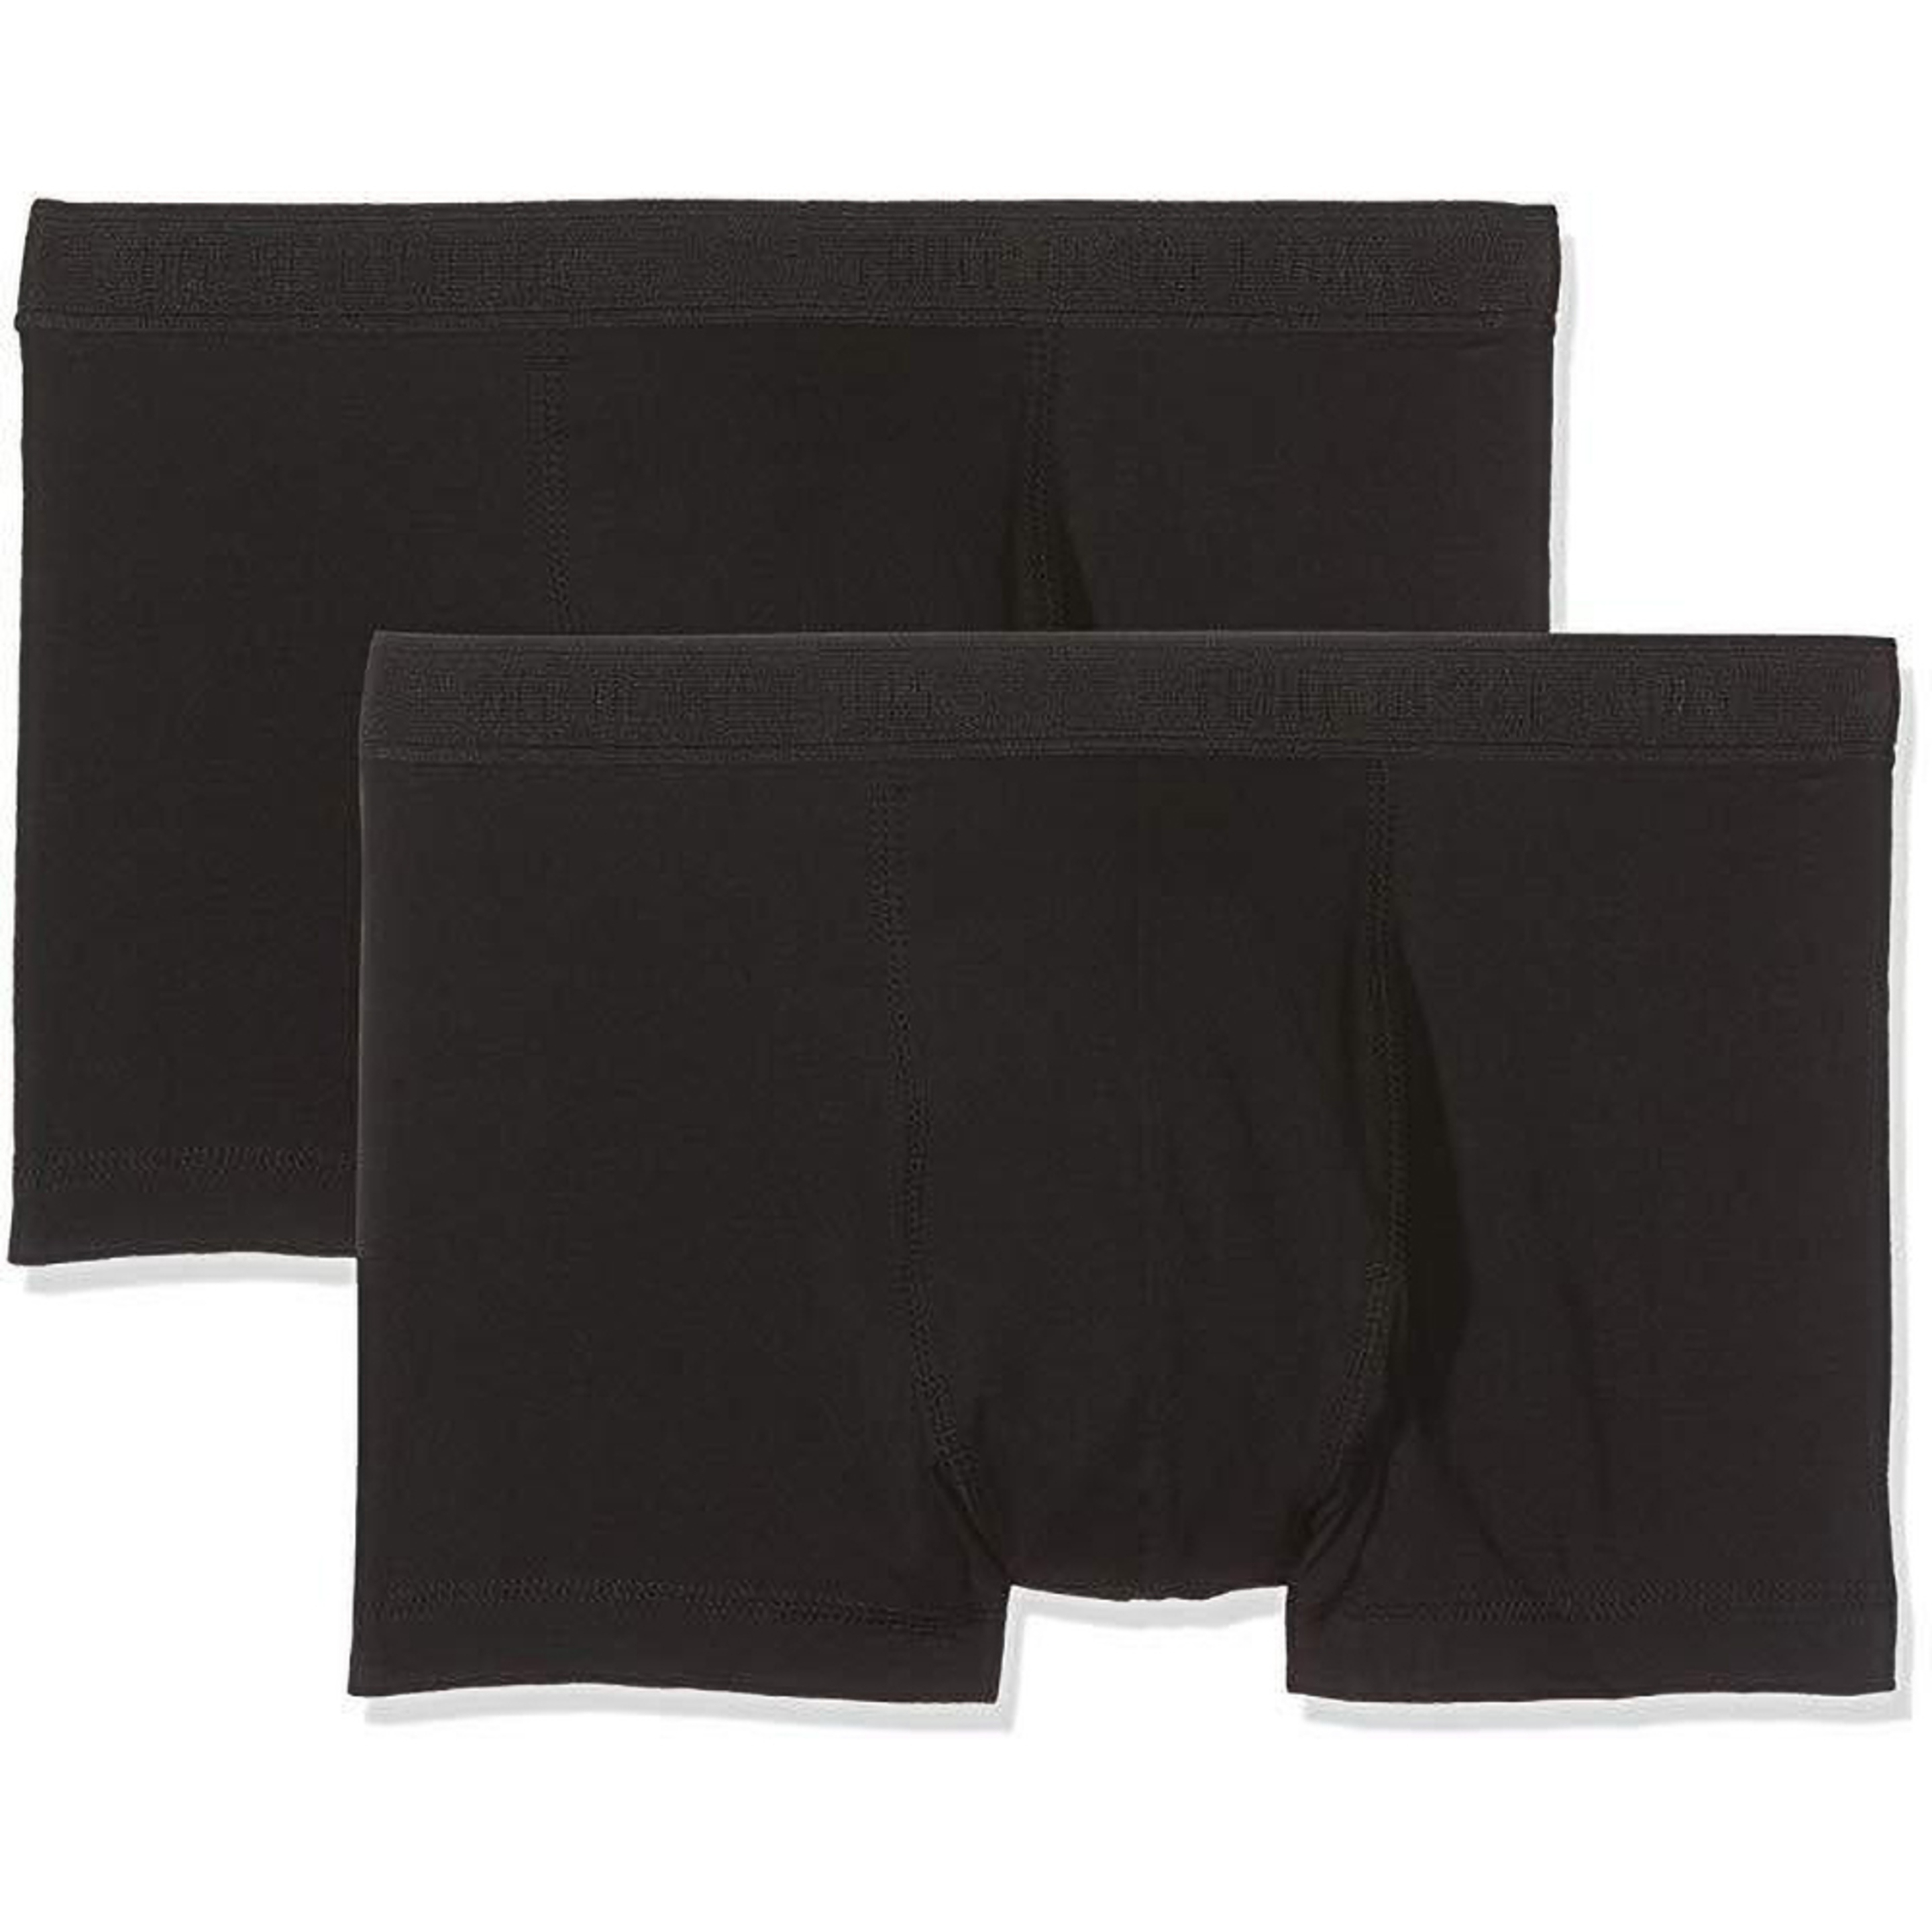 Calzoncillos Boxer Fruit Of The Loom Classic Shorty (pack De 2) - Negro  MKP